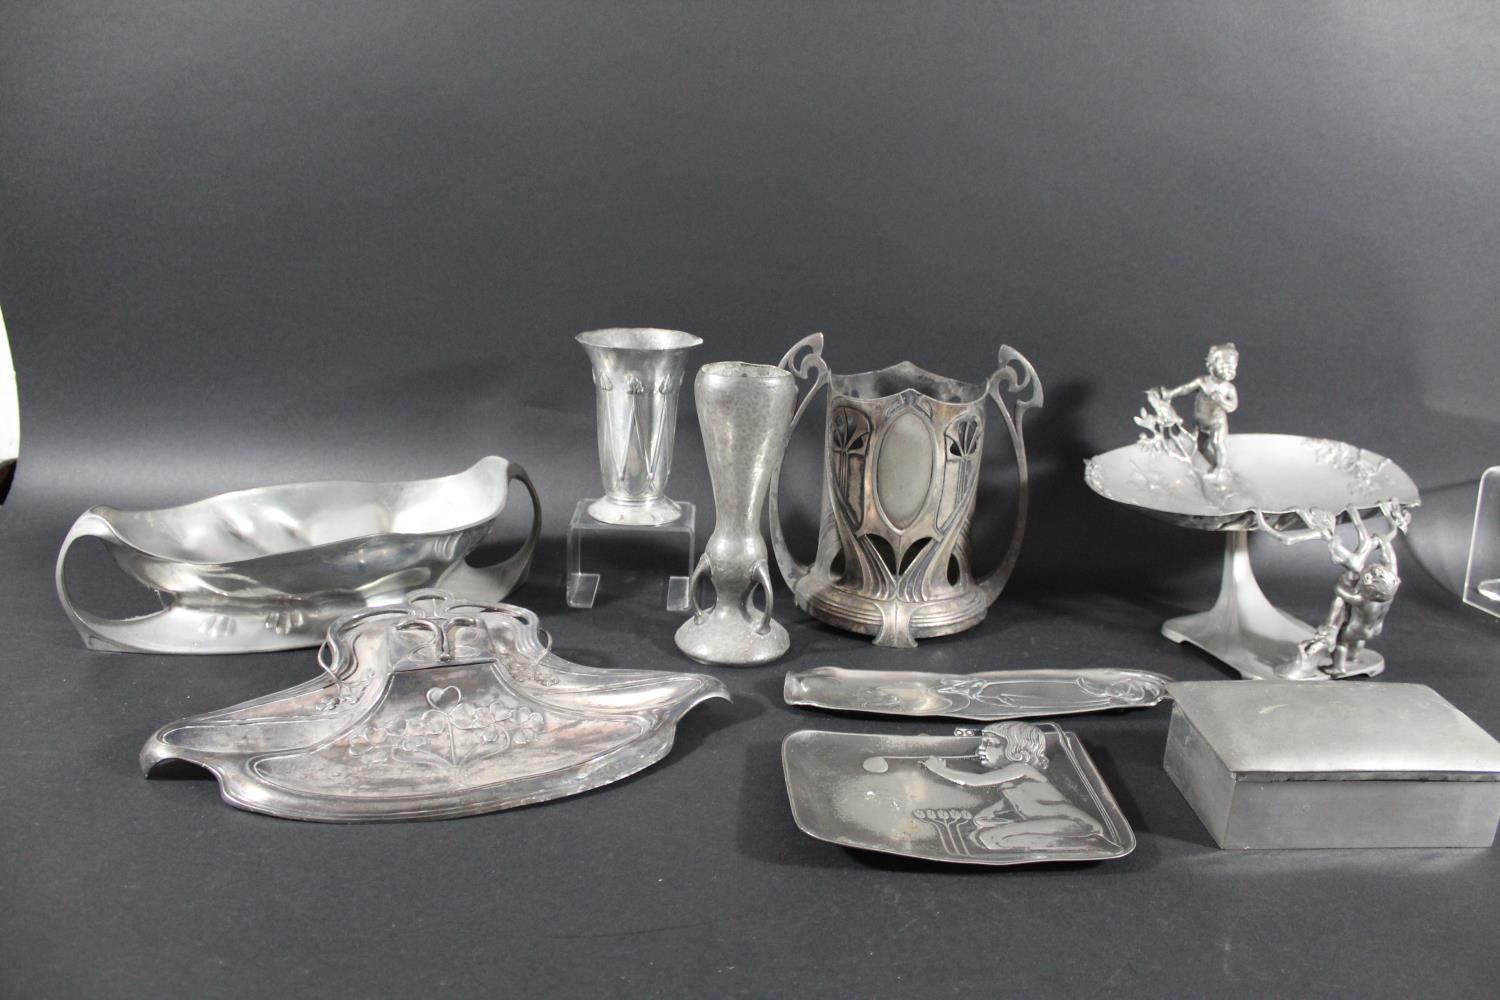 WMF ART NOUVEAU INKSTAND & OTHER ART NOUVEAU PEWTER including a WMF pewter inkstand with floral